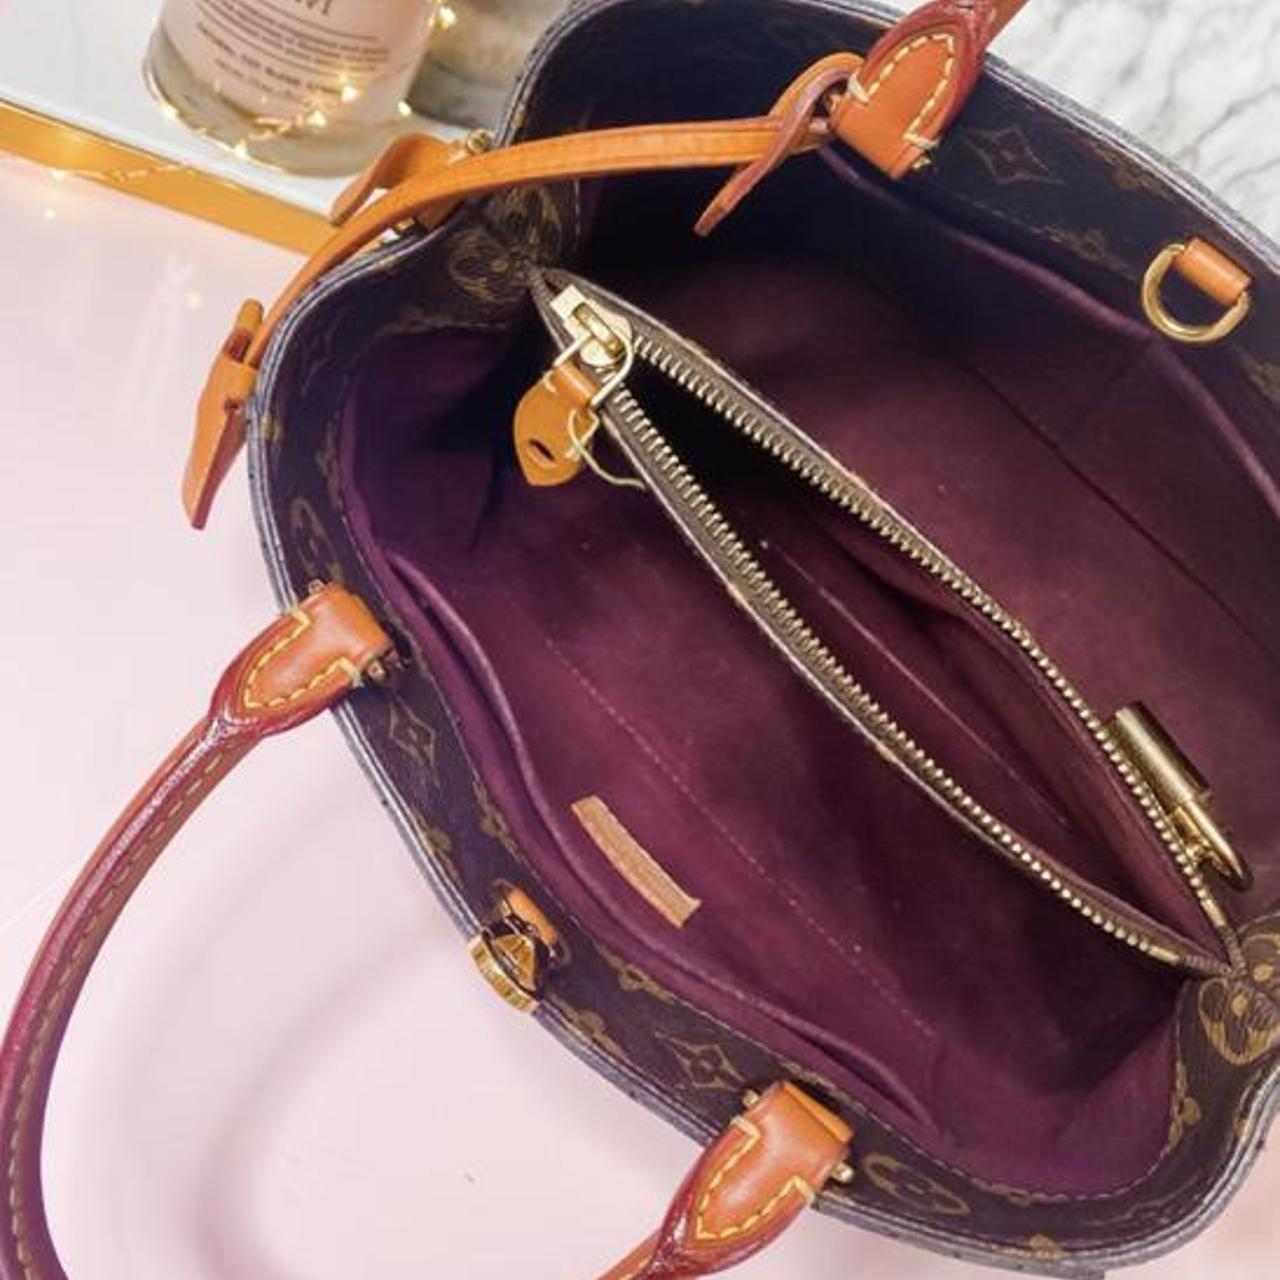 Authentic Louis Vuitton Montaigne BB Used but only - Depop